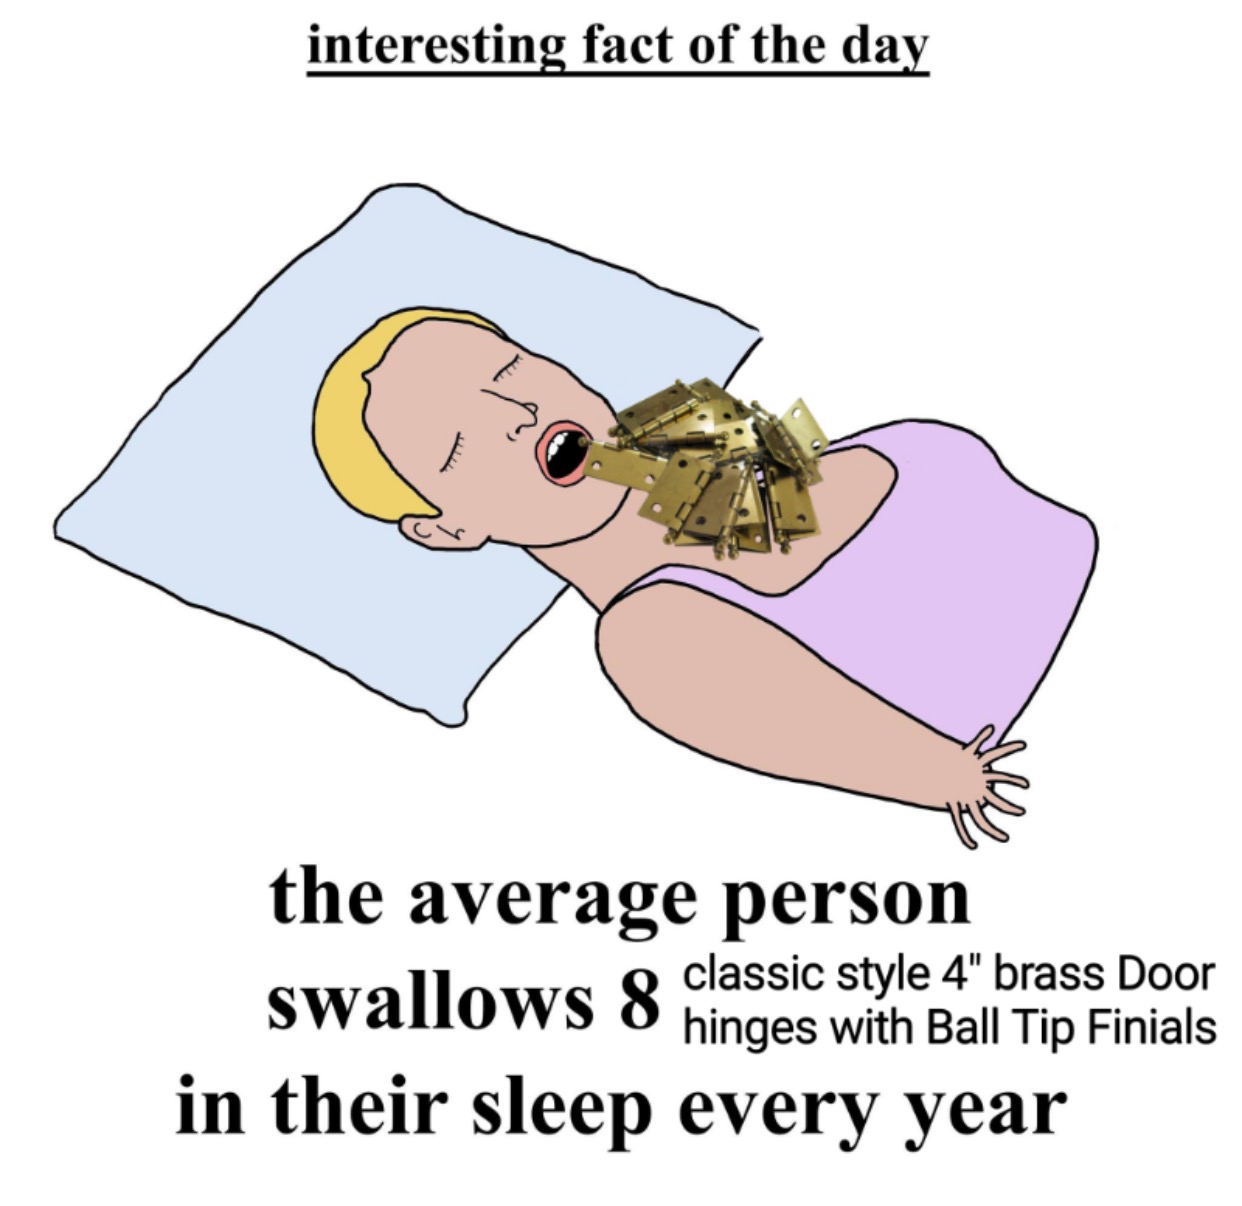 door hinges meme - interesting fact of the day the average person classic style 4" brass Door swallows 8 hinges with Ball Tip Finials in their sleep every year